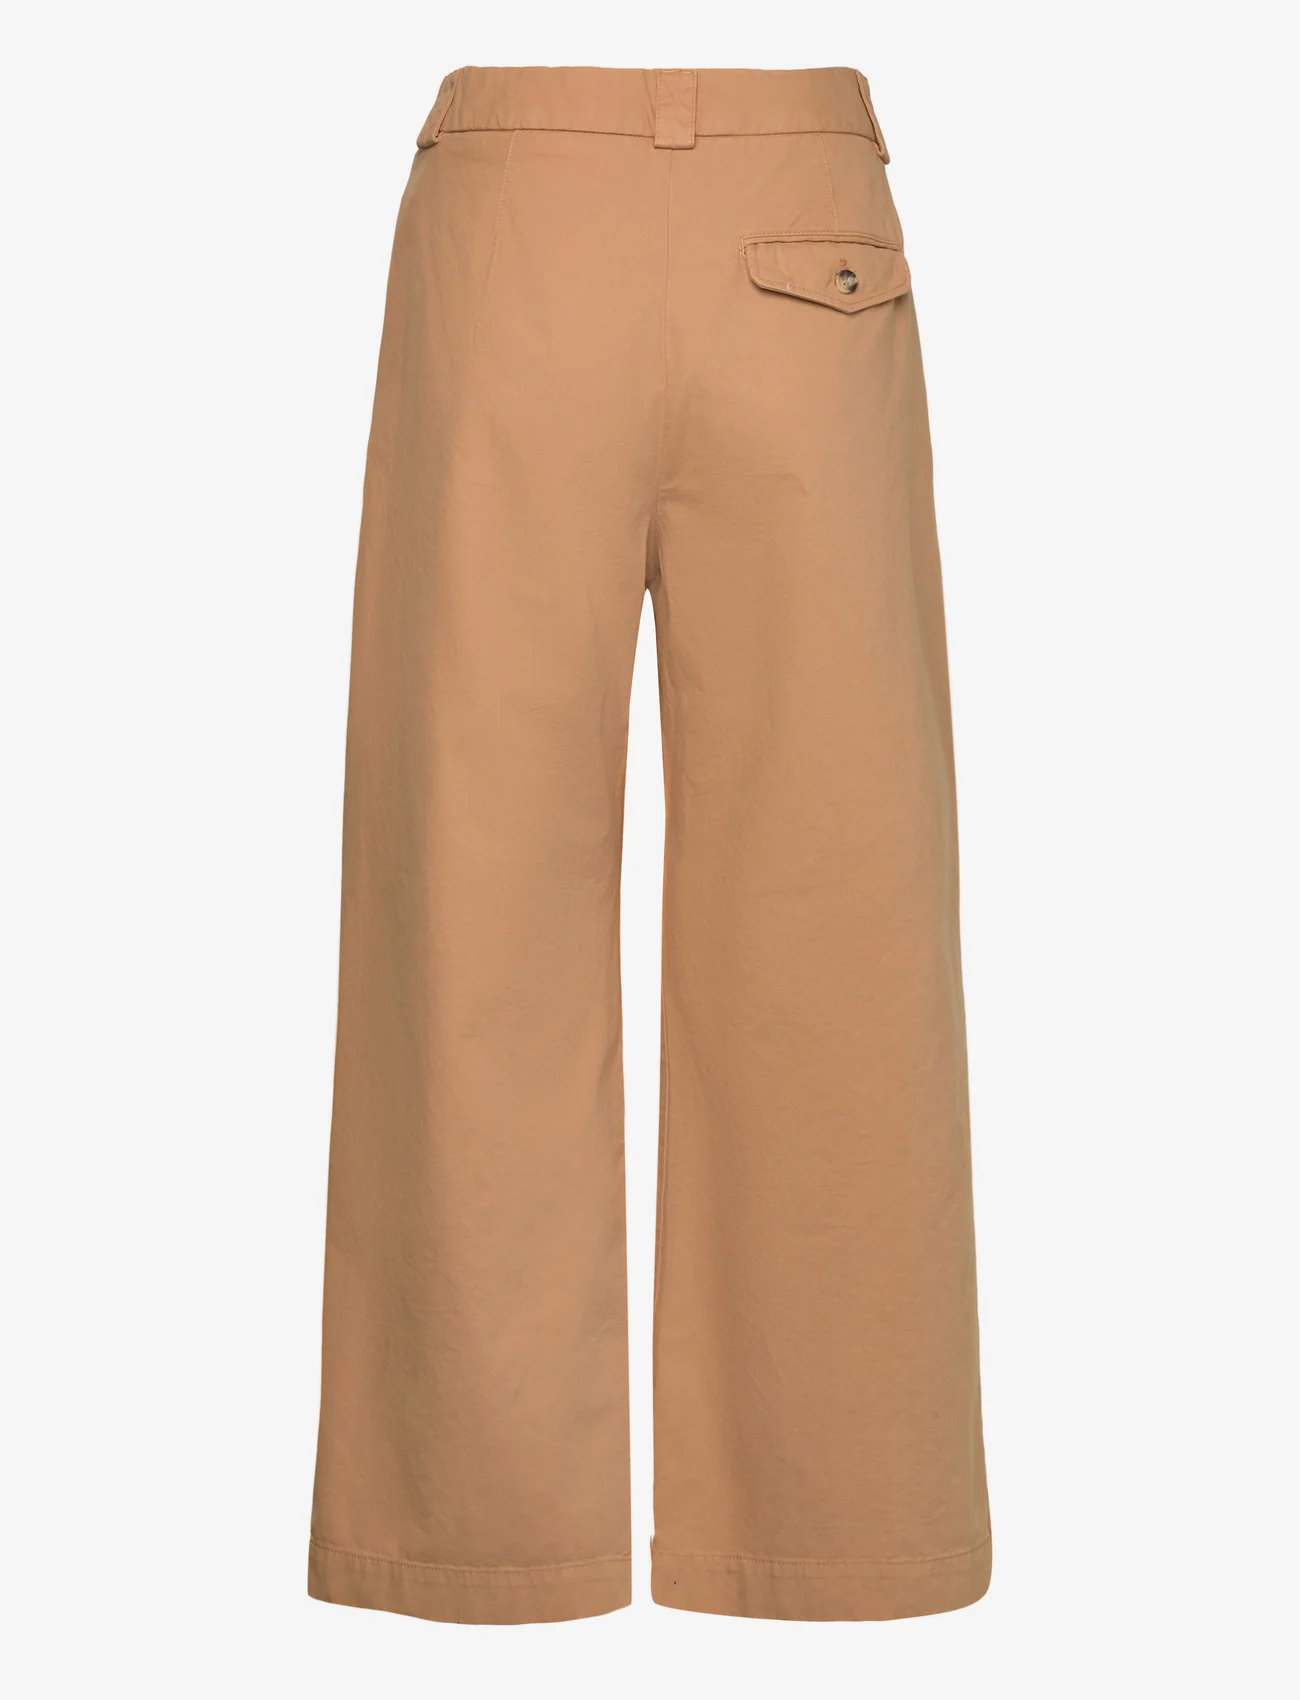 Hope - Relaxed Pleated Chinos - beige chino - 1